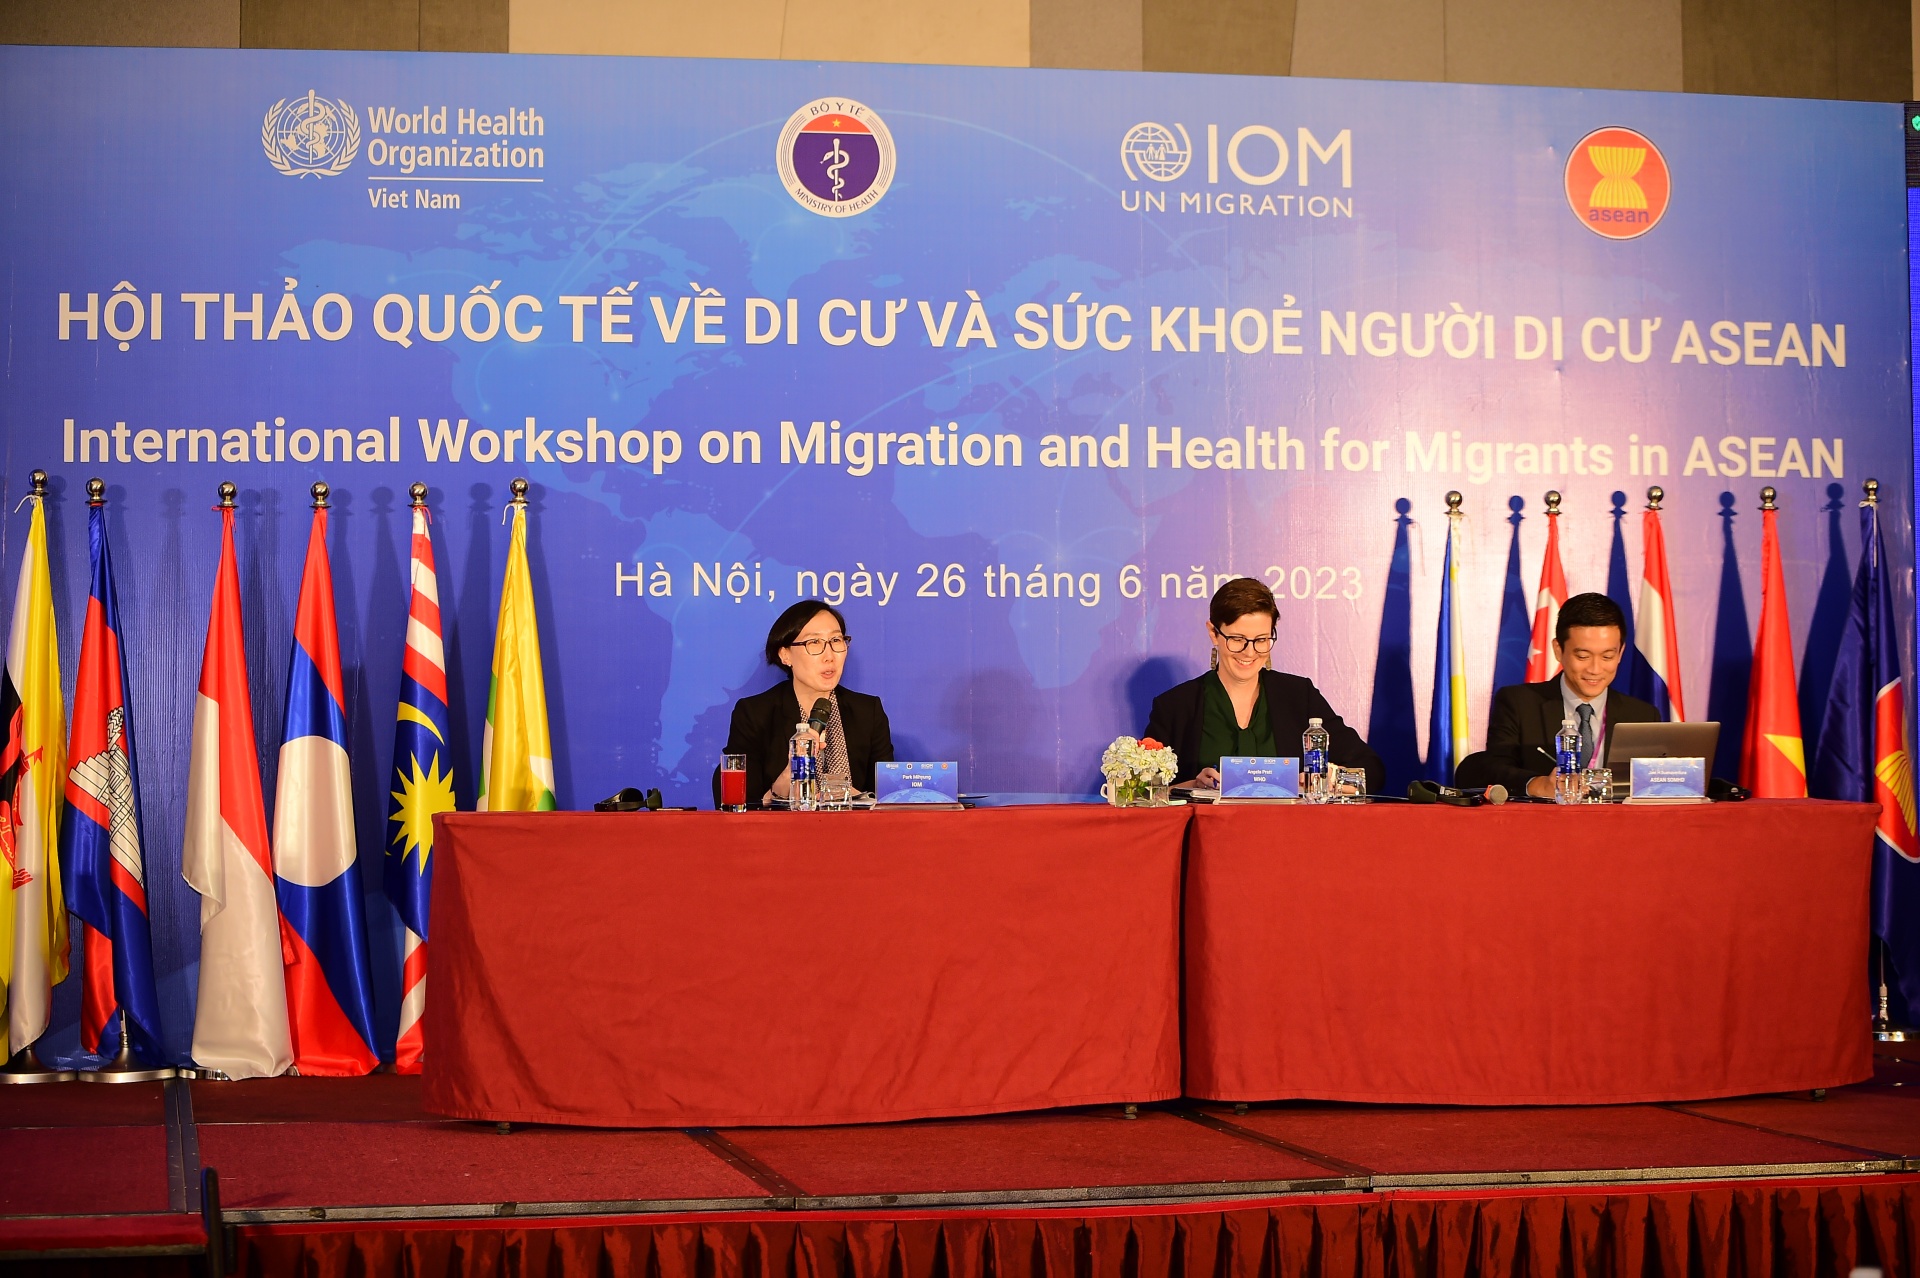 Cooperation to improve migrant health and well-being in ASEAN region